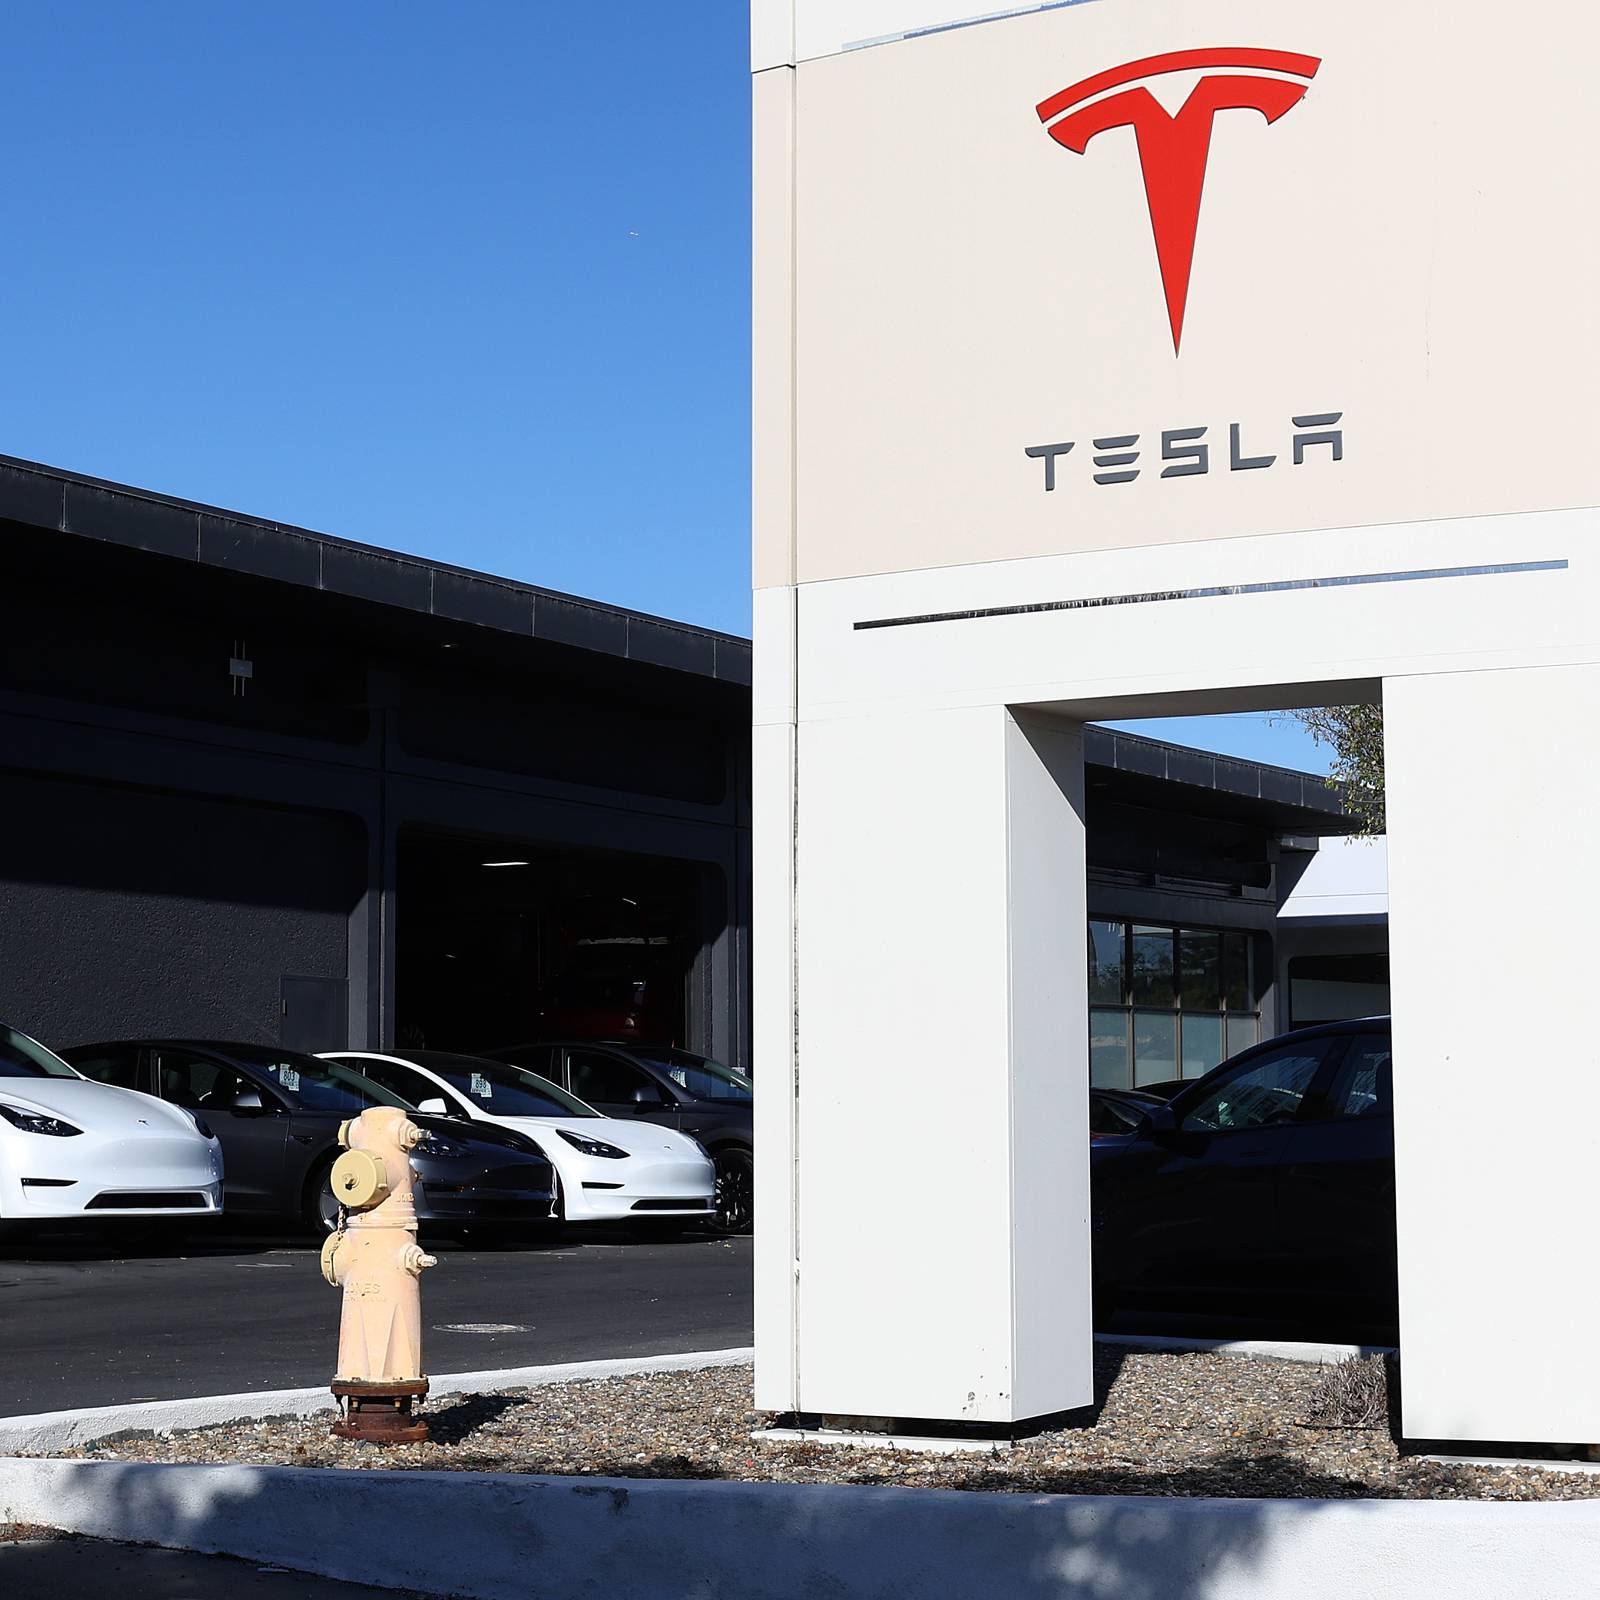 Tesla recalls almost all US vehicles in largest ever such move – The